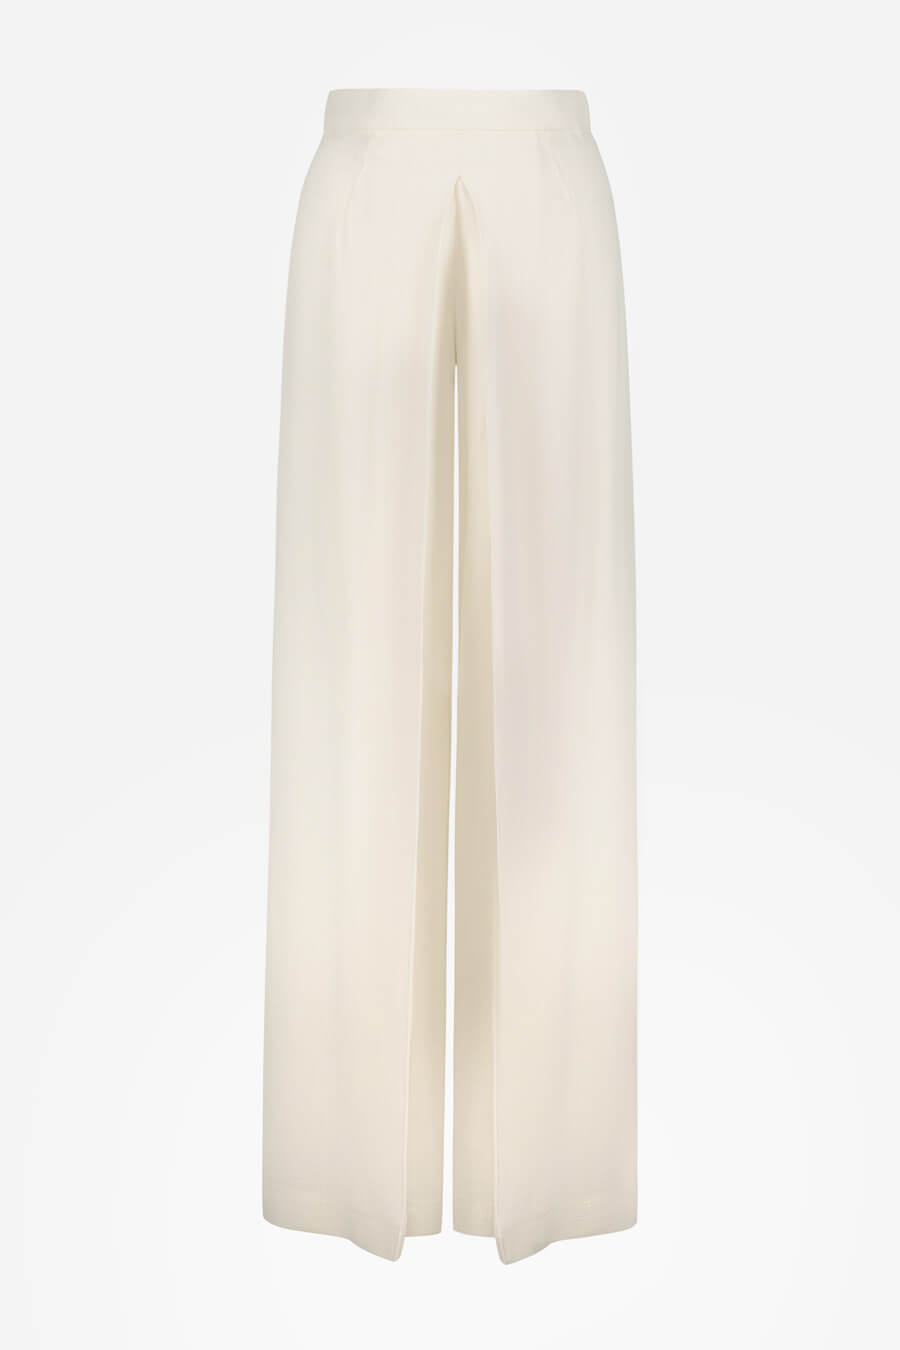 High-waist pants with wide leg and front slits in white